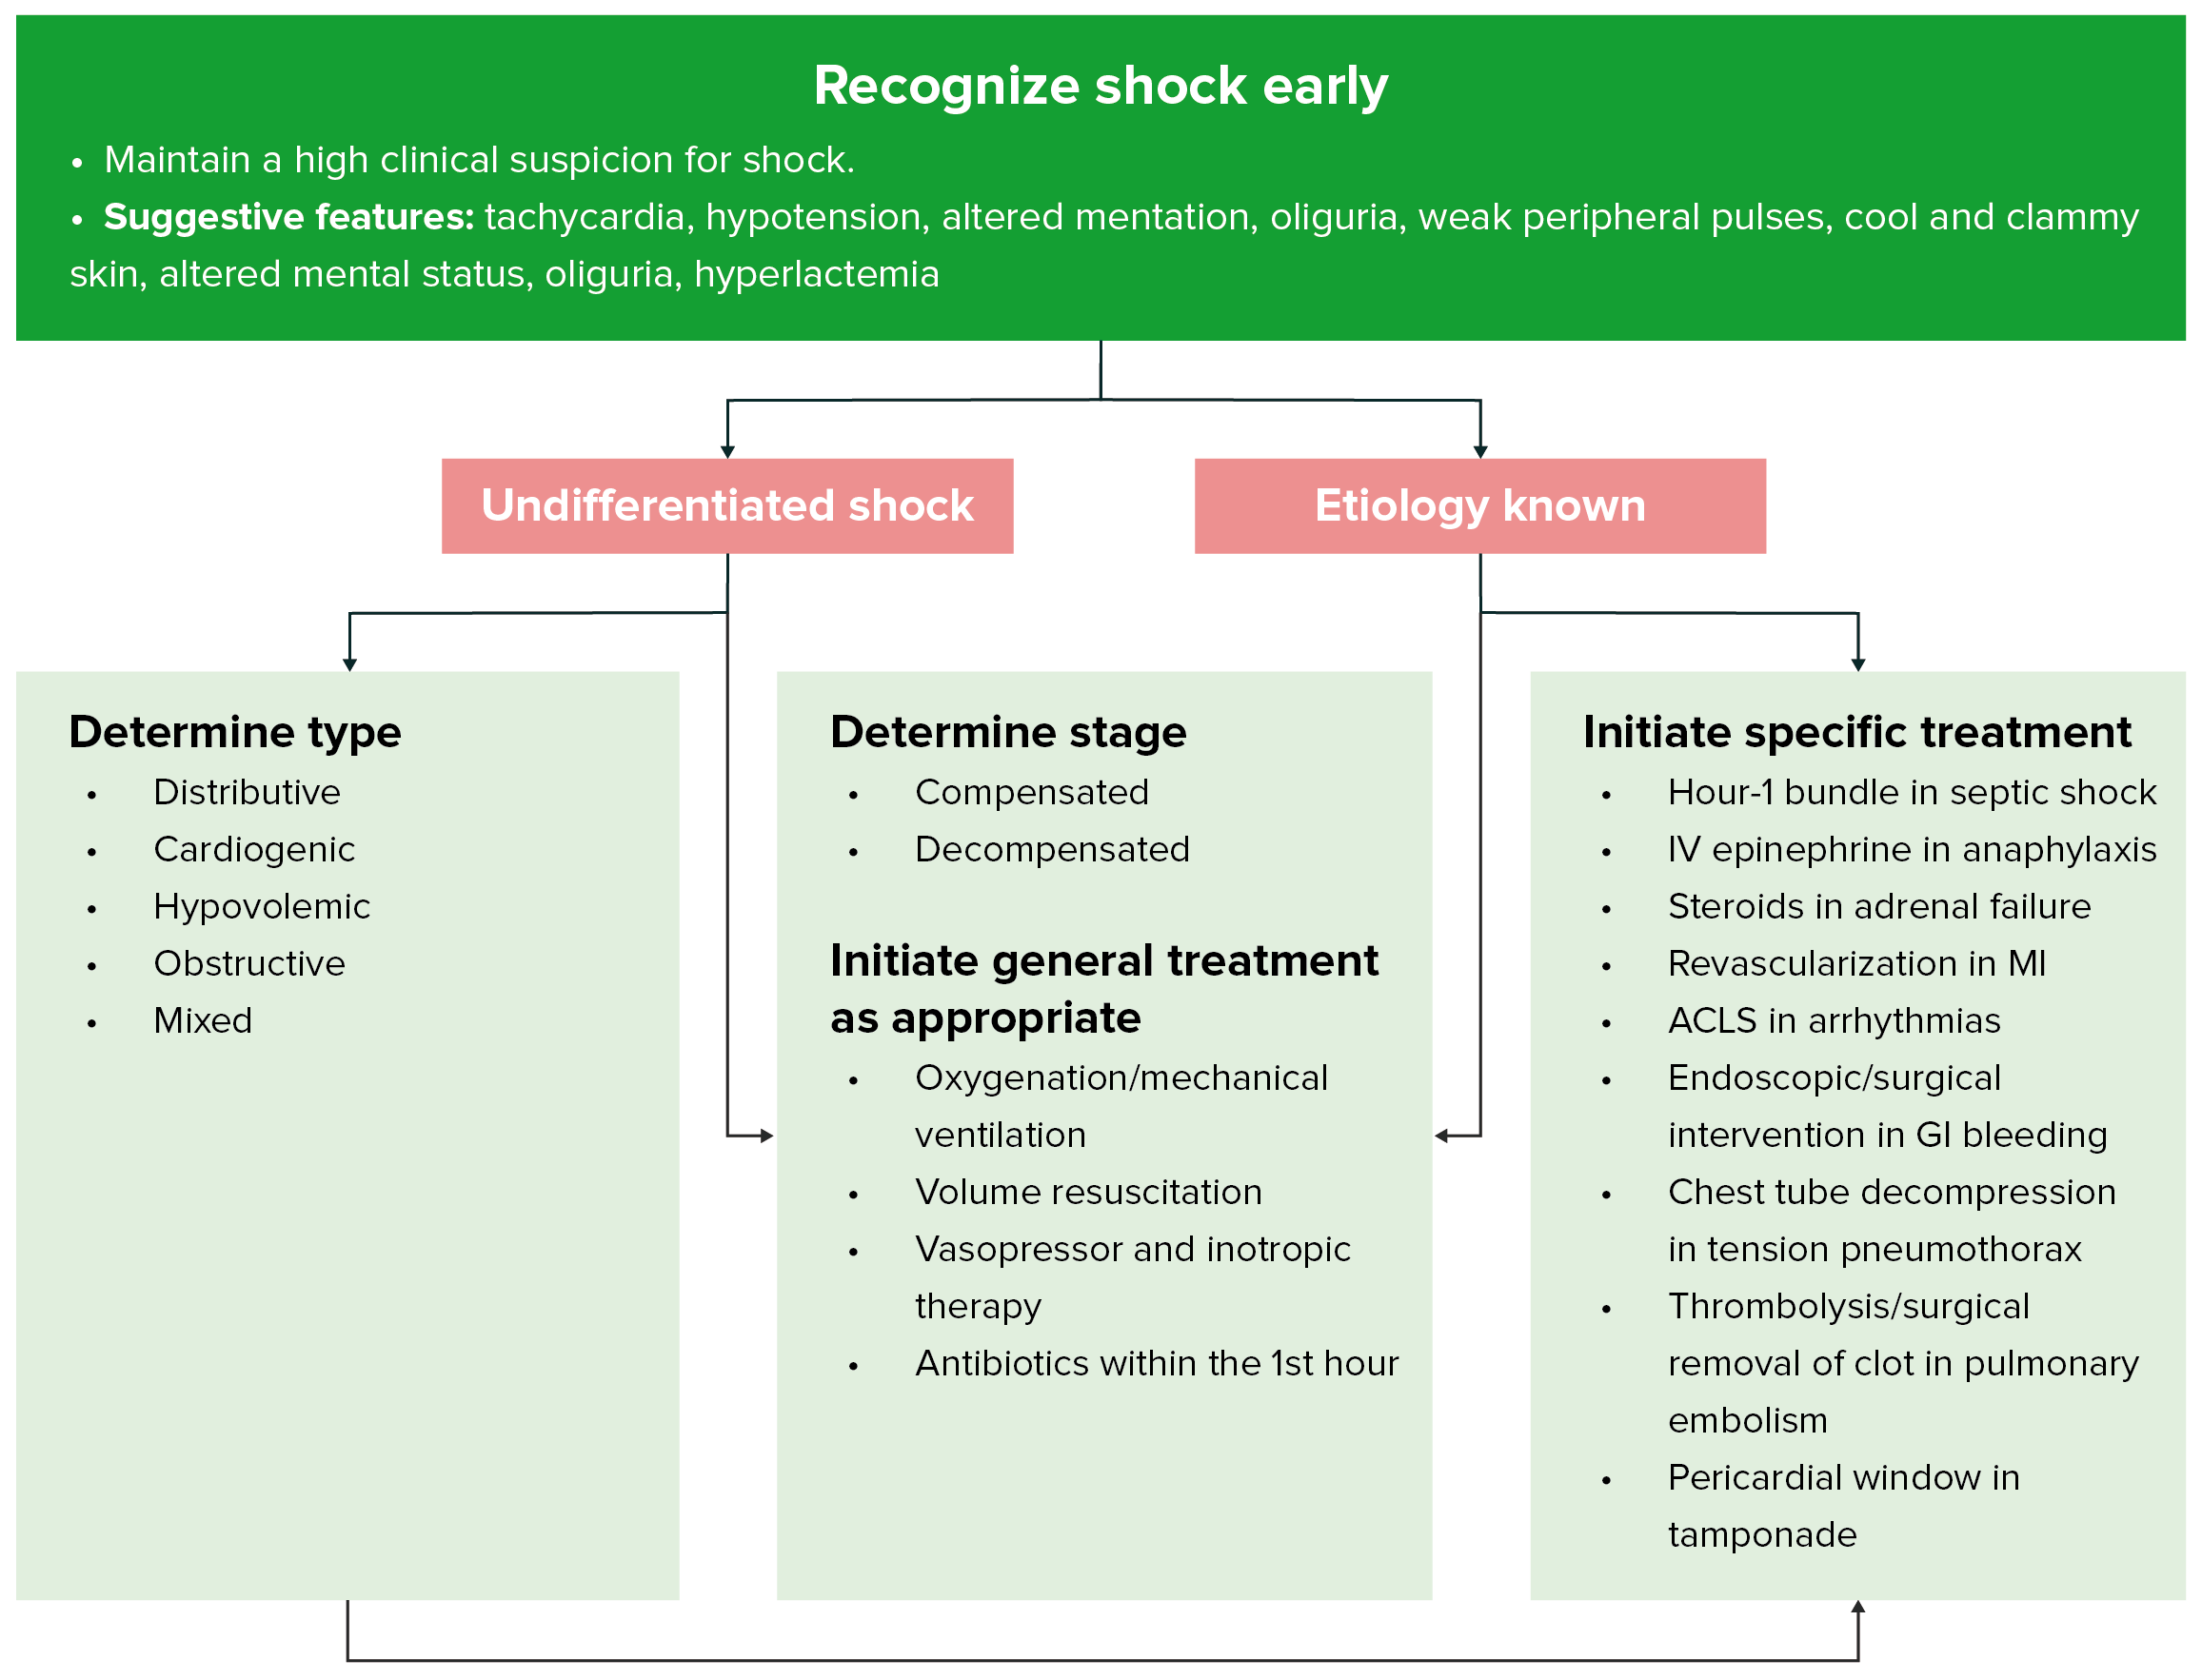 hypovolemic shock stages